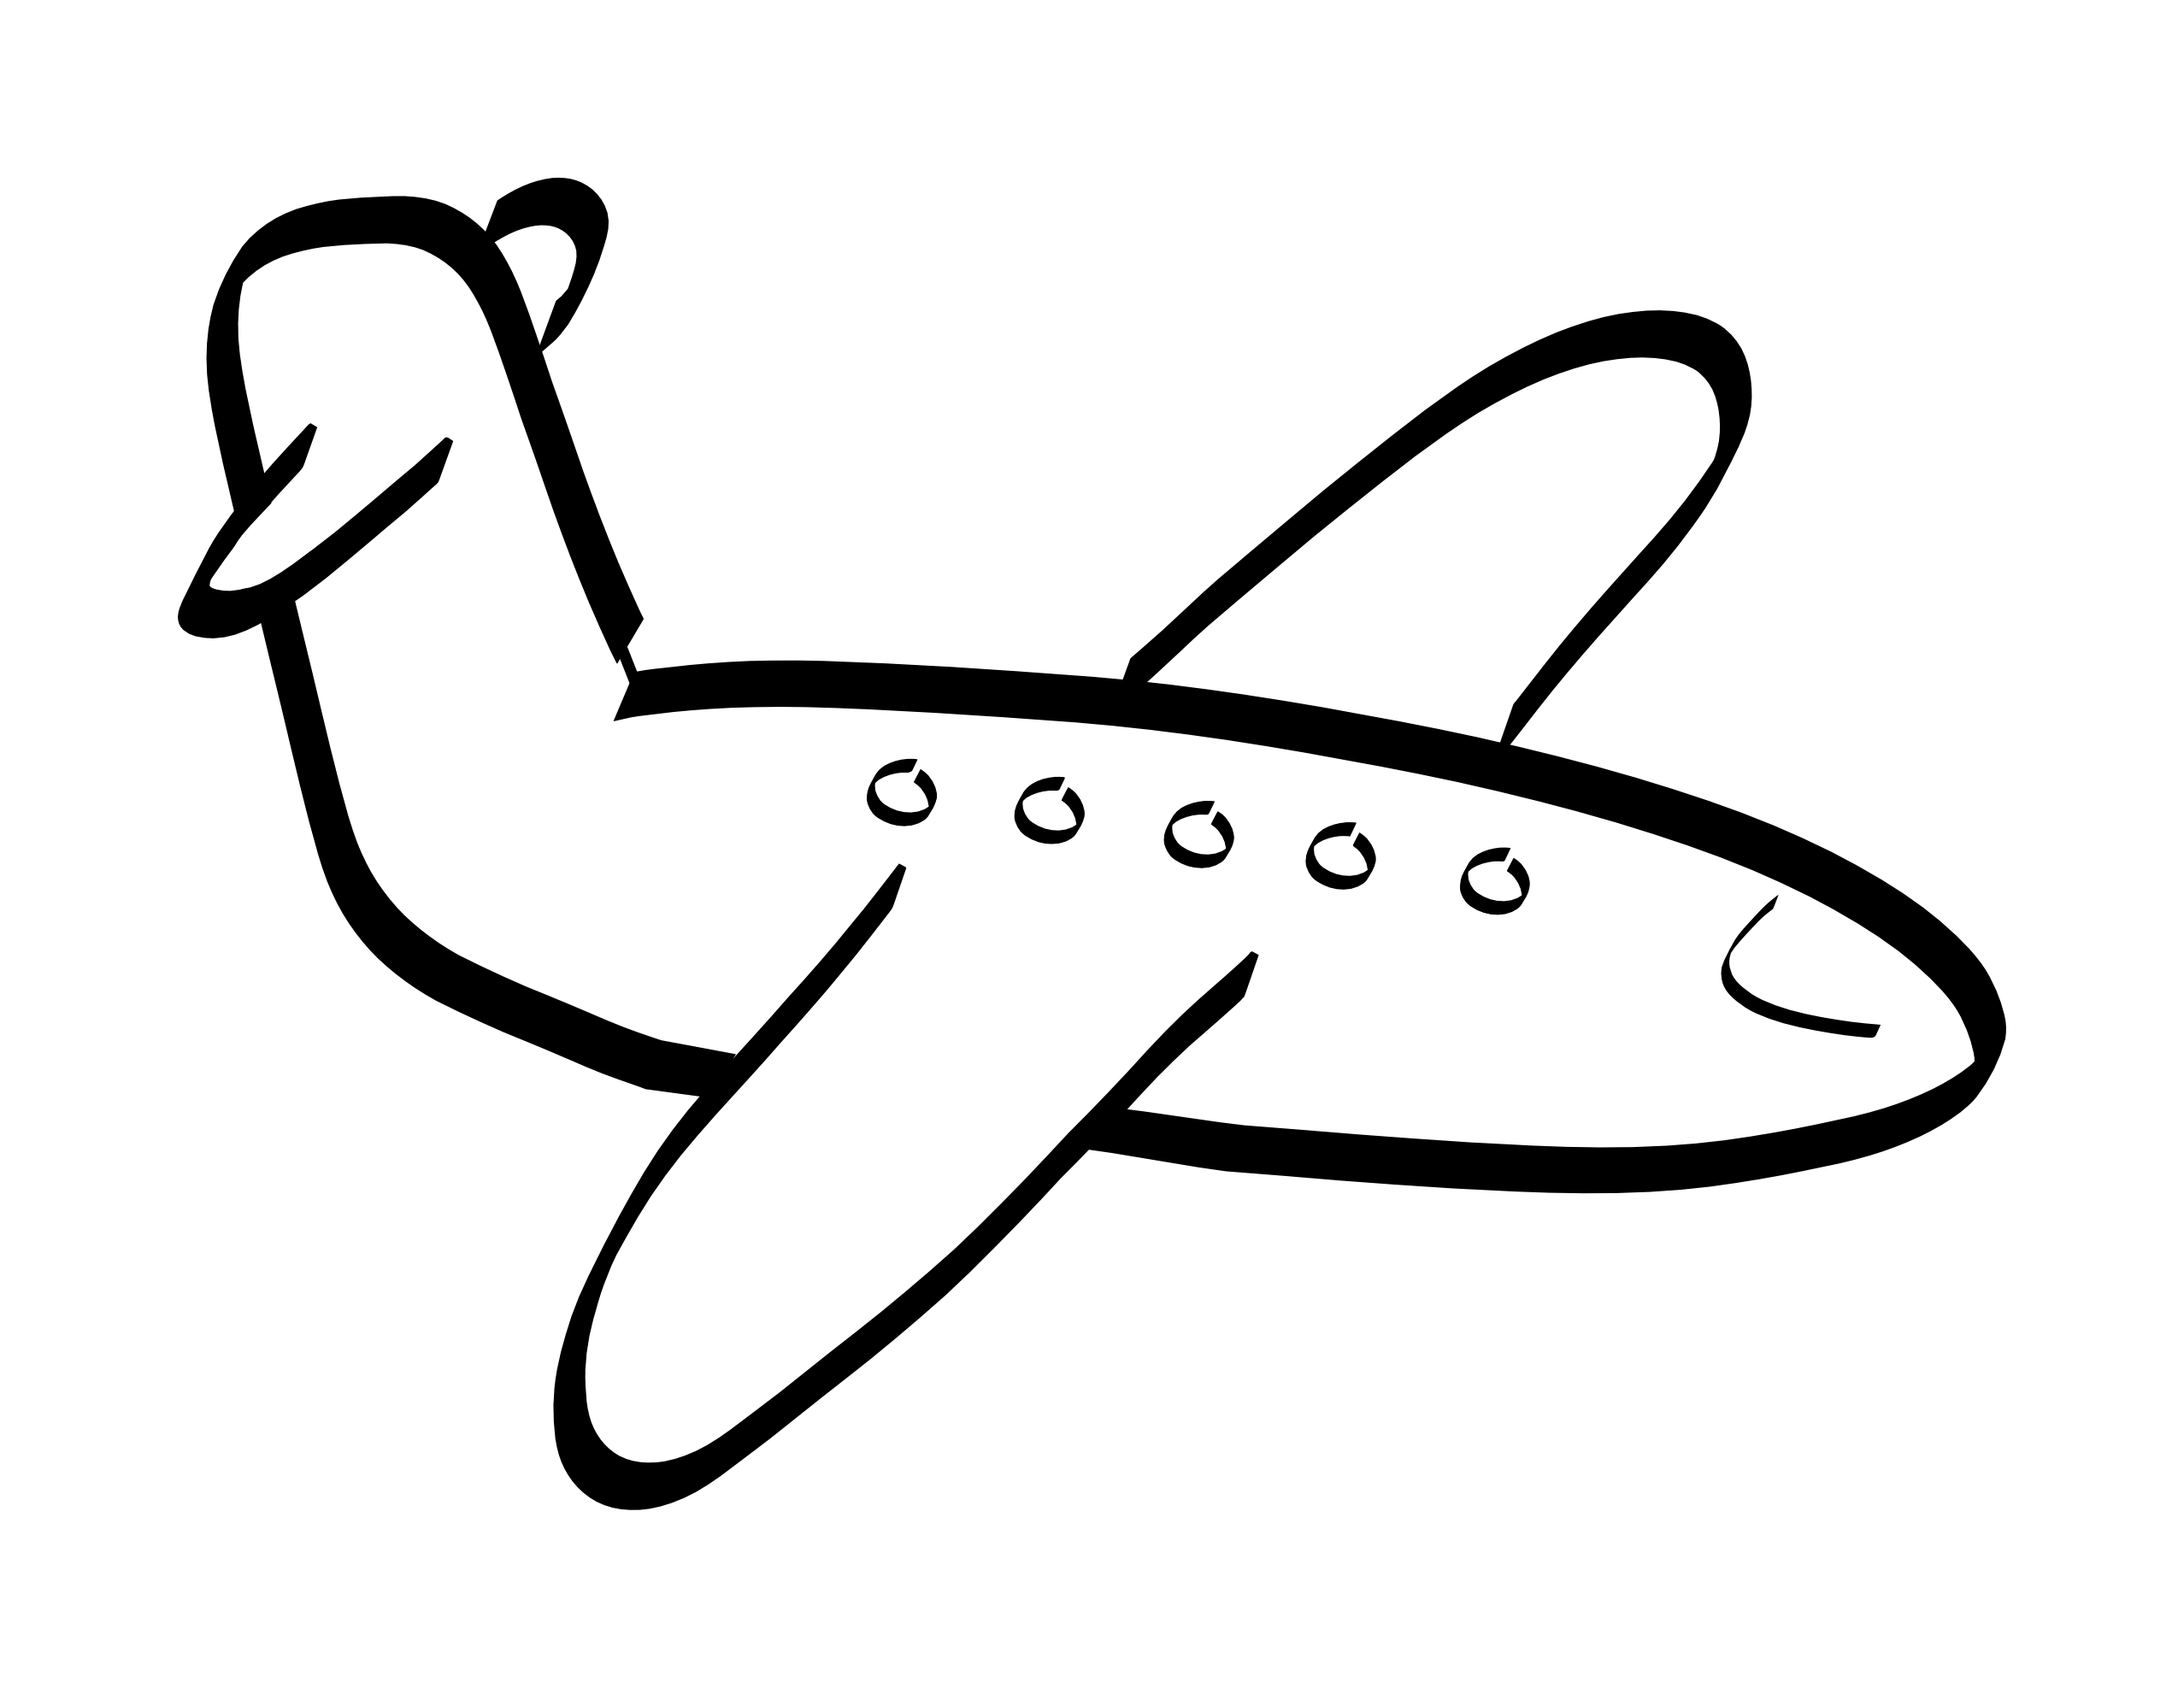 Airplane Black And White Clipart Images  Pictures - Becuo